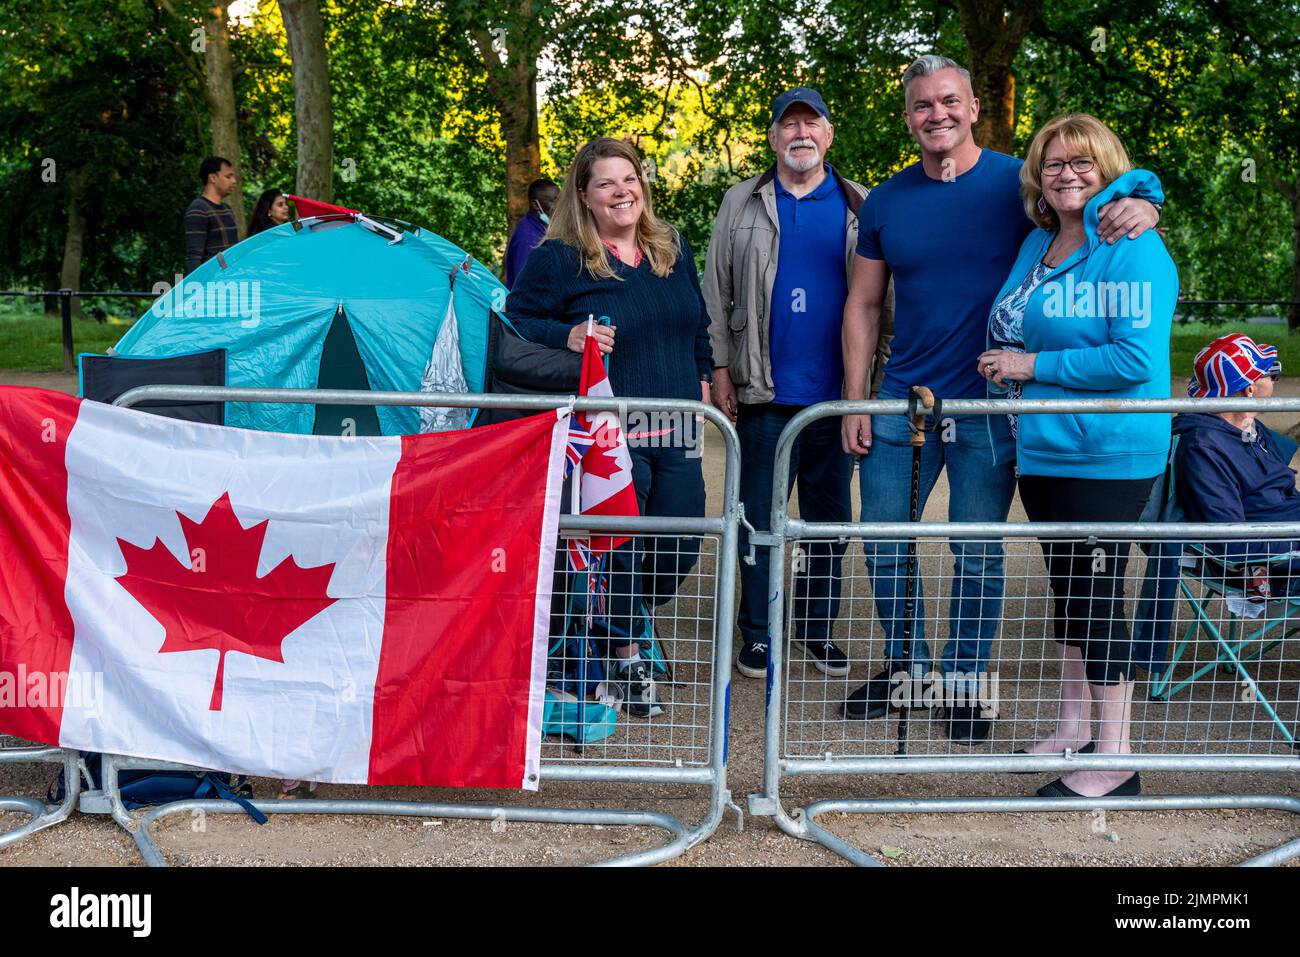 A Group Of Canadians Camp Out Overnight In The Mall For A Good Vantage Spot Before The Queen's Birthday Parade, London, UK. Stock Photo